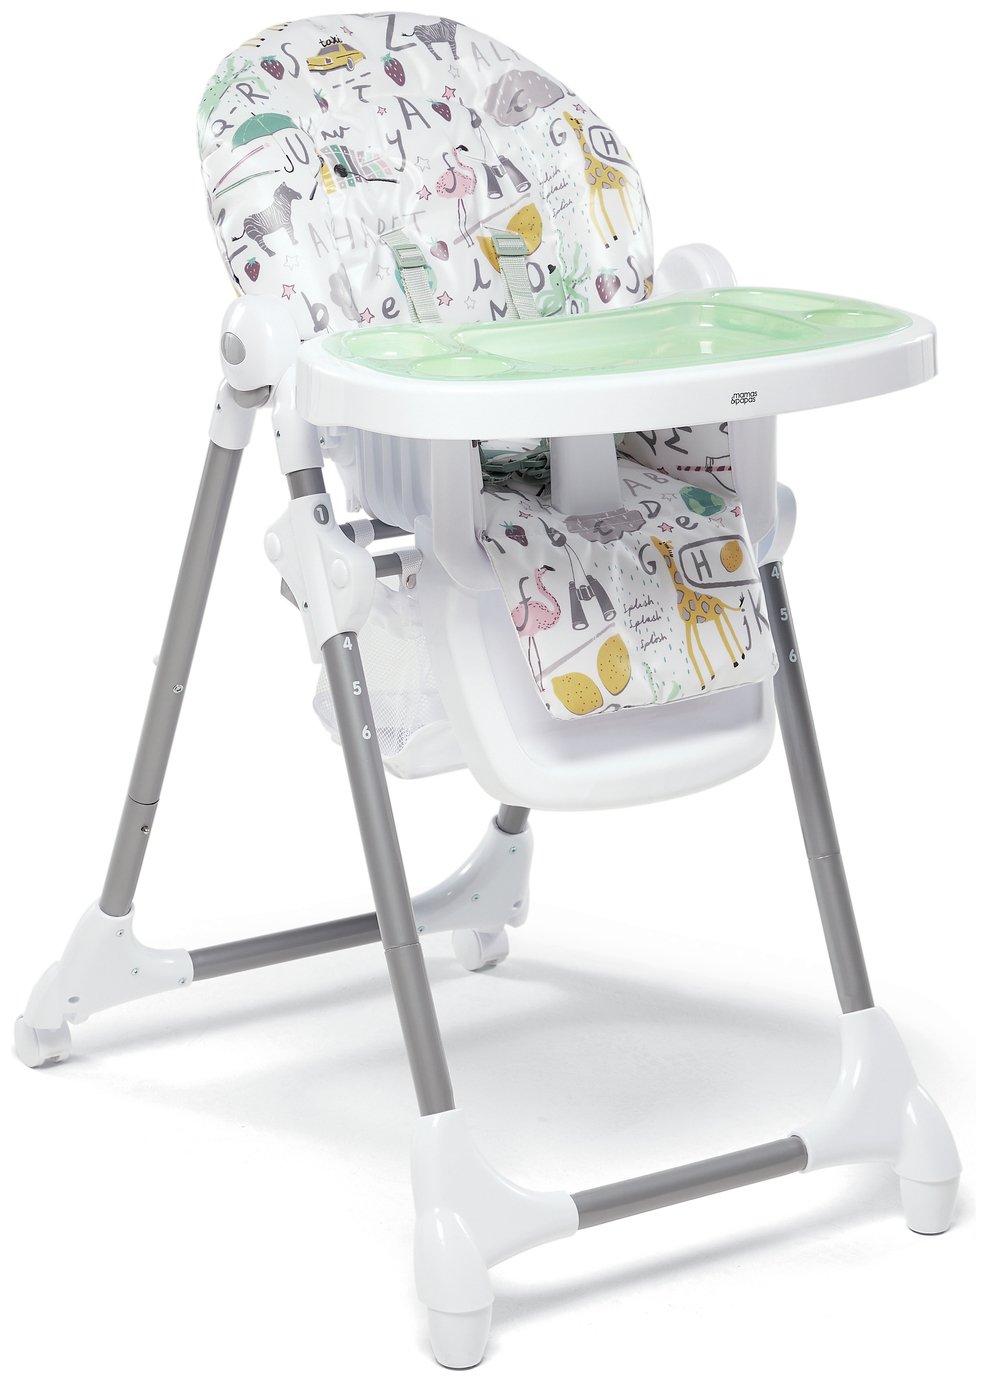 strap on high chair